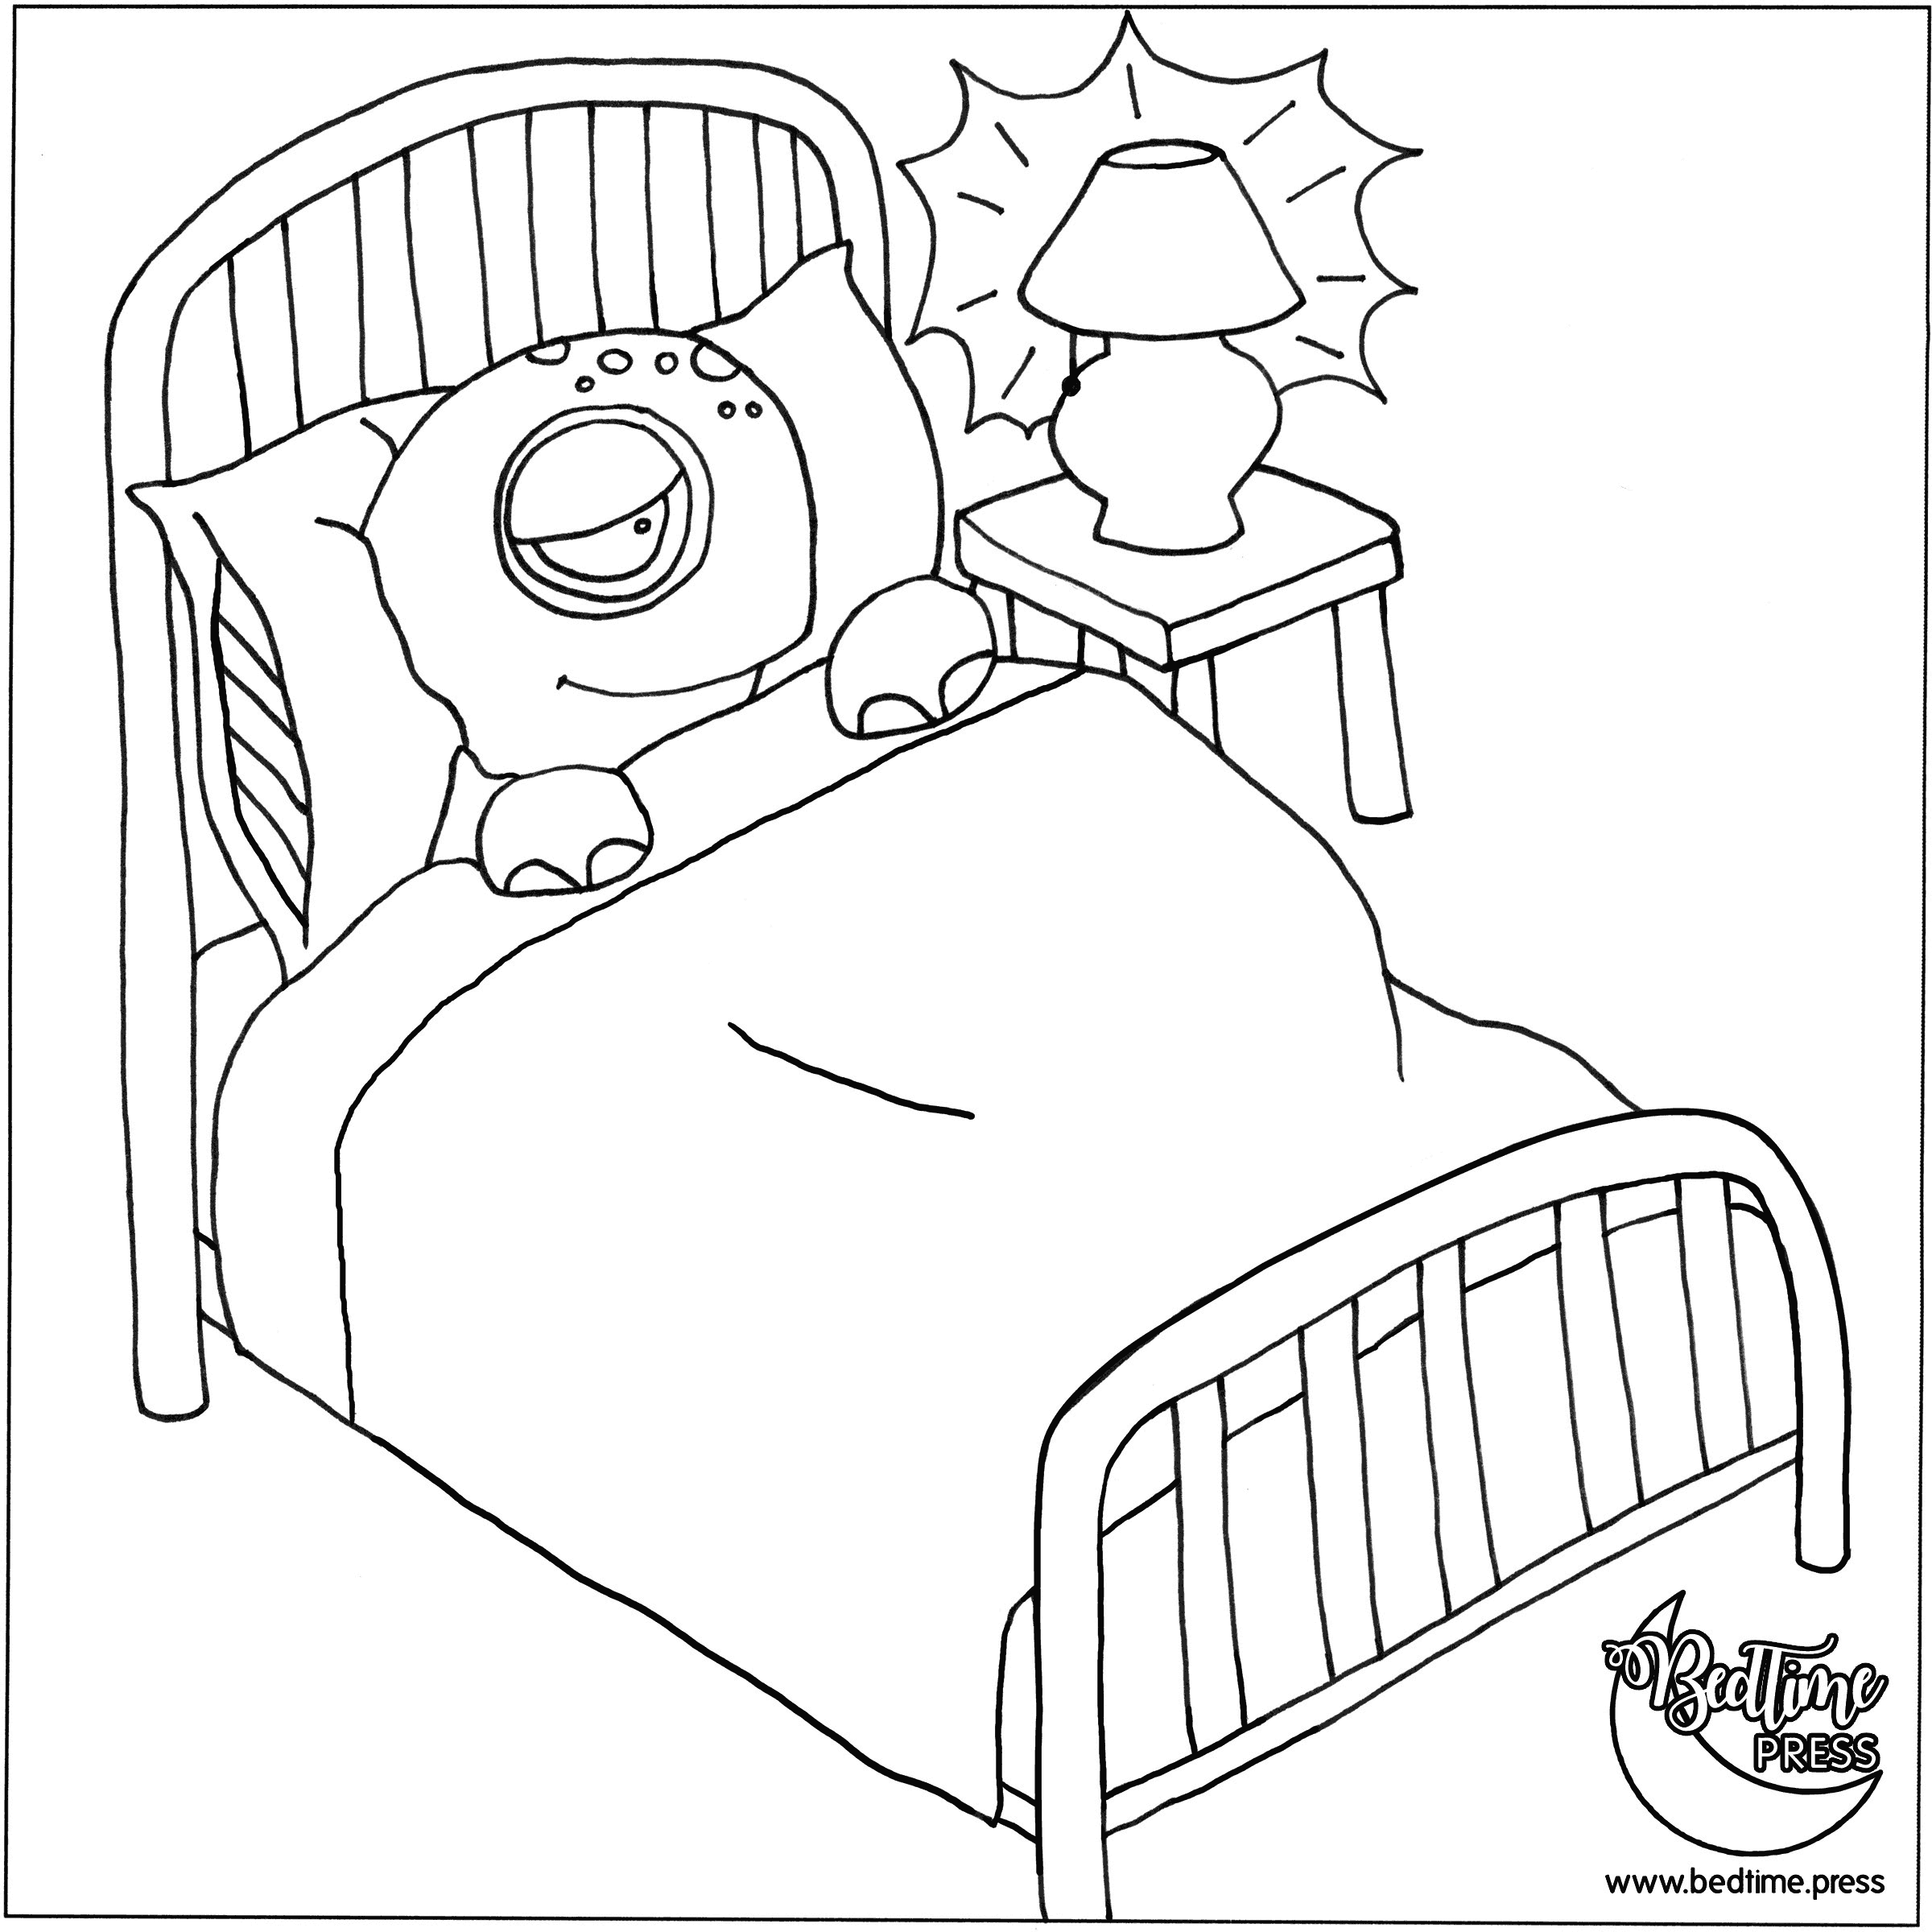 Coloring pages â picture books for kids